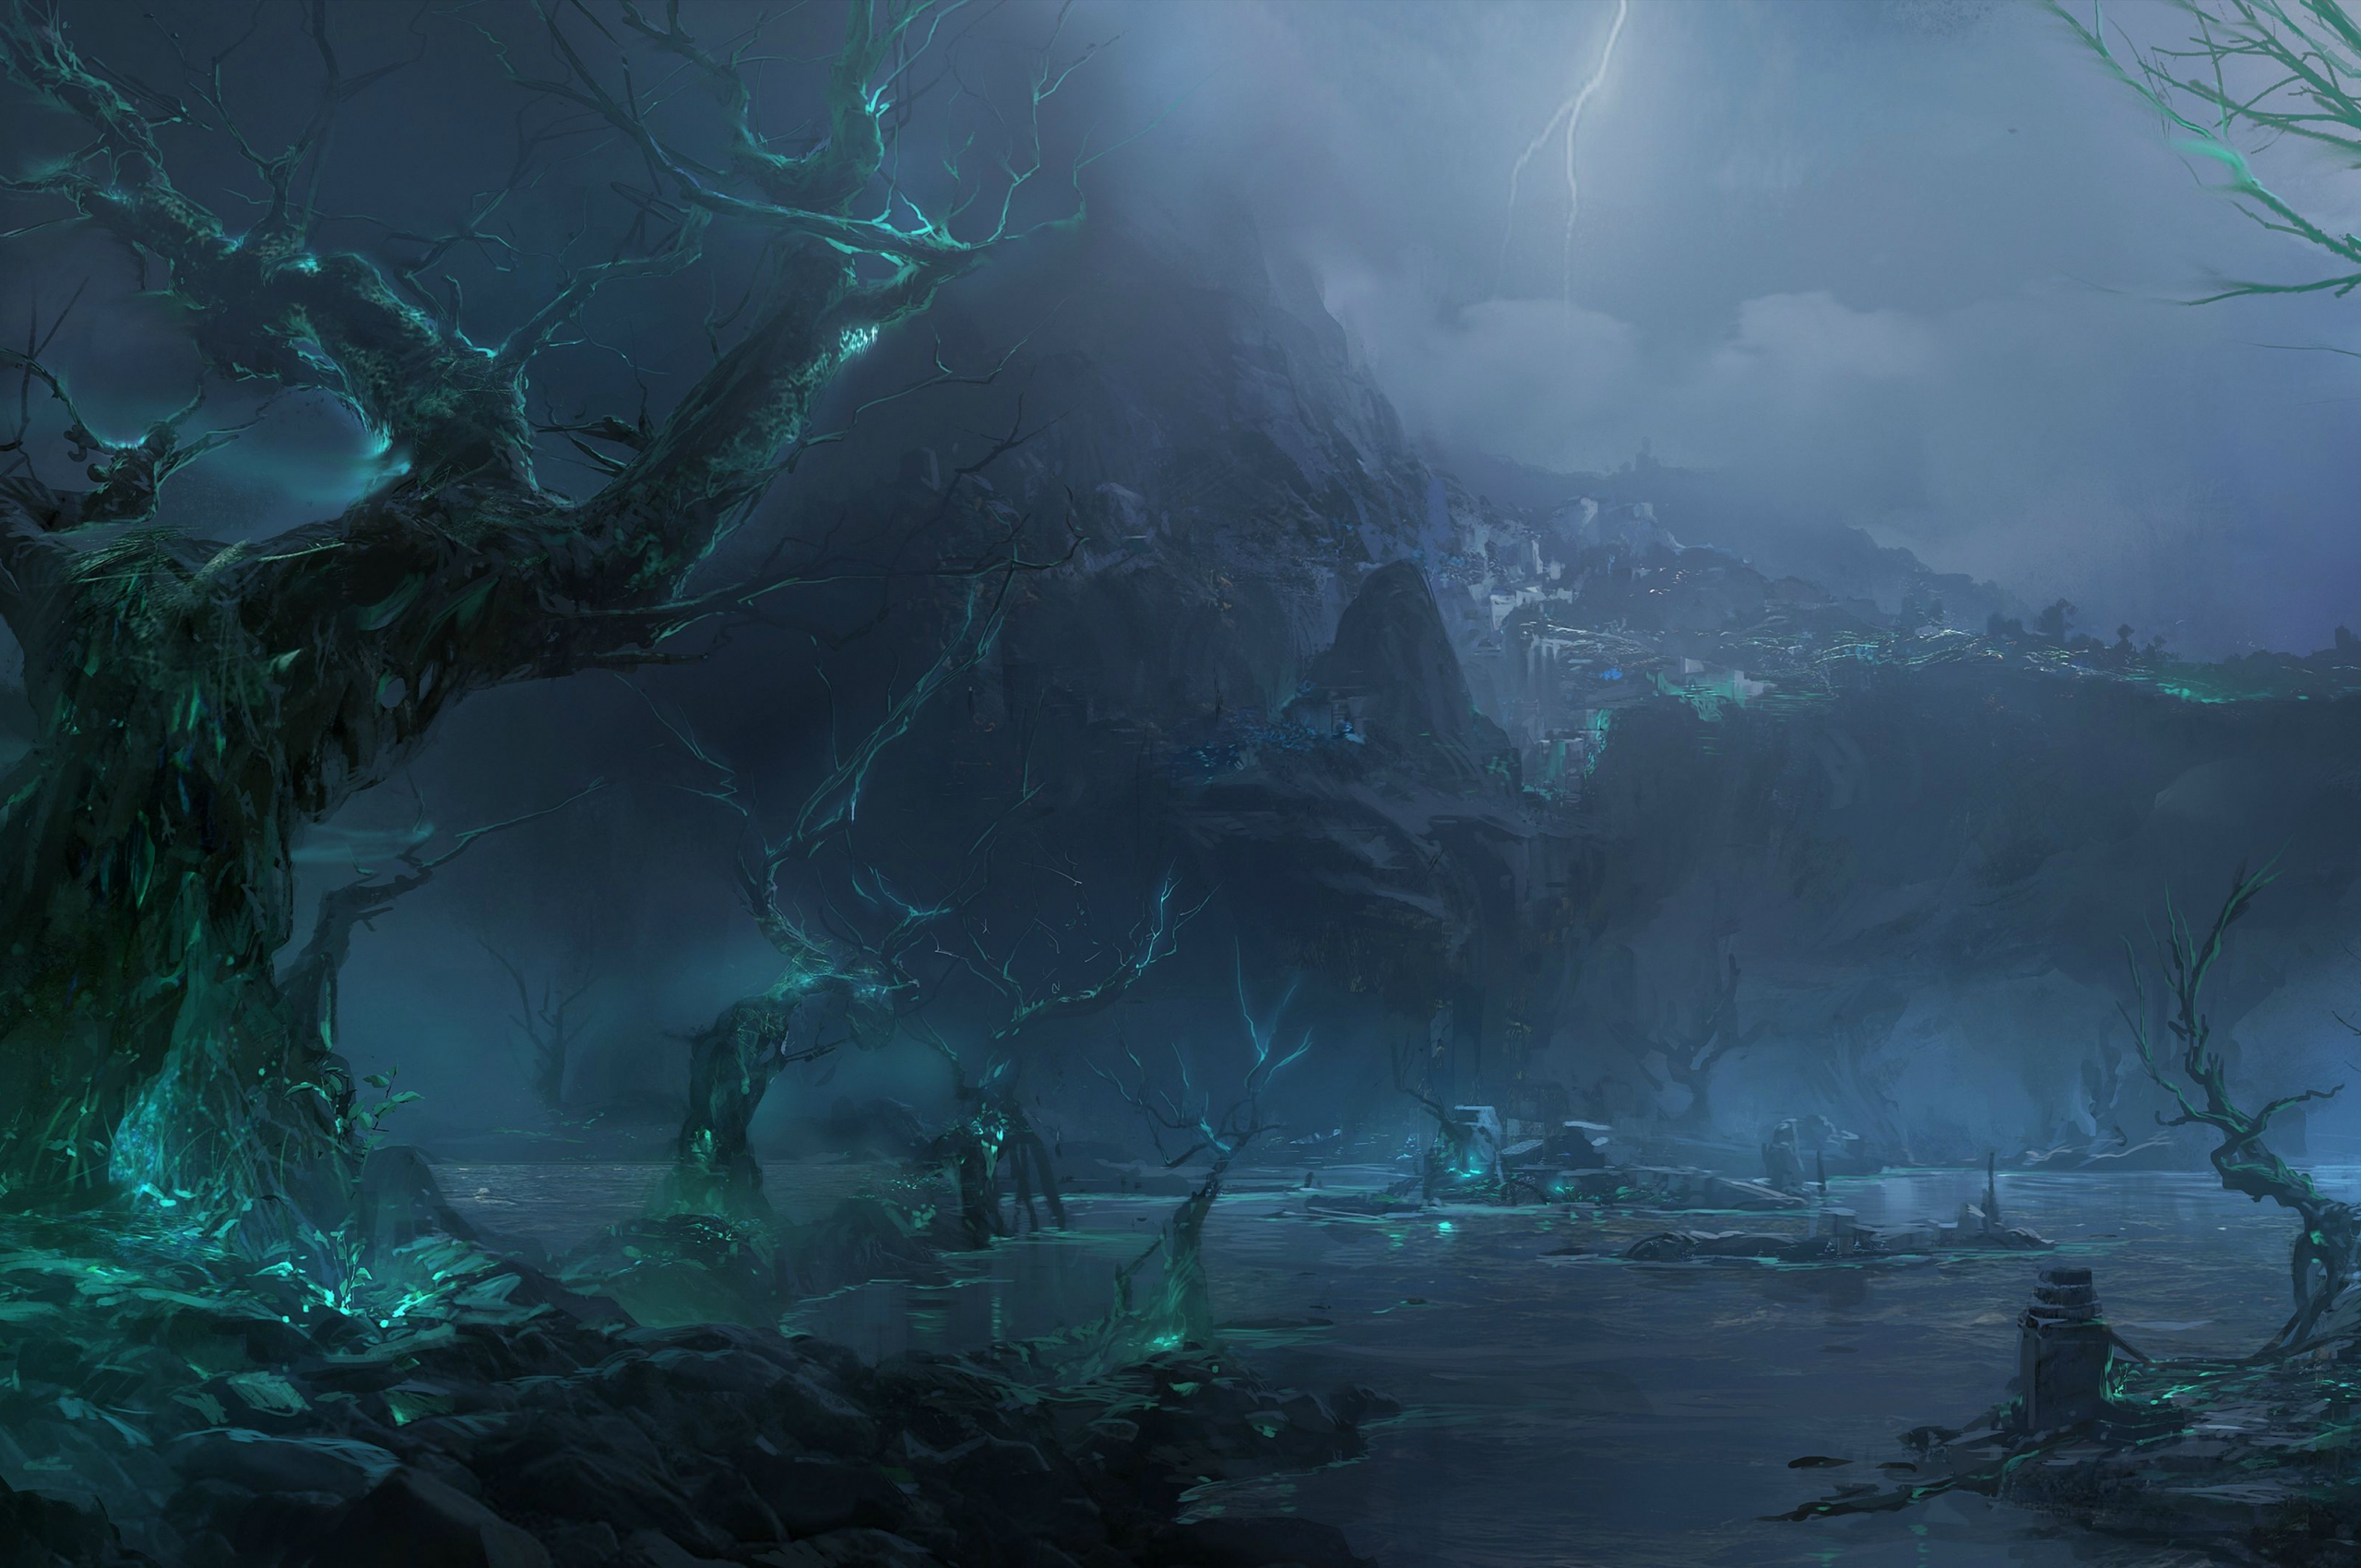 2560x1700 Free download Summoners Rift Wallpaper Middle of summoners rift [4500x2142] for your Desktop, Mobile \u0026 Tablet | Explore 43+ Summoner's Rift Wallpaper | Summoner's Rift Wallpaper, Rift Wallpapers, Summoners War Wallpapers